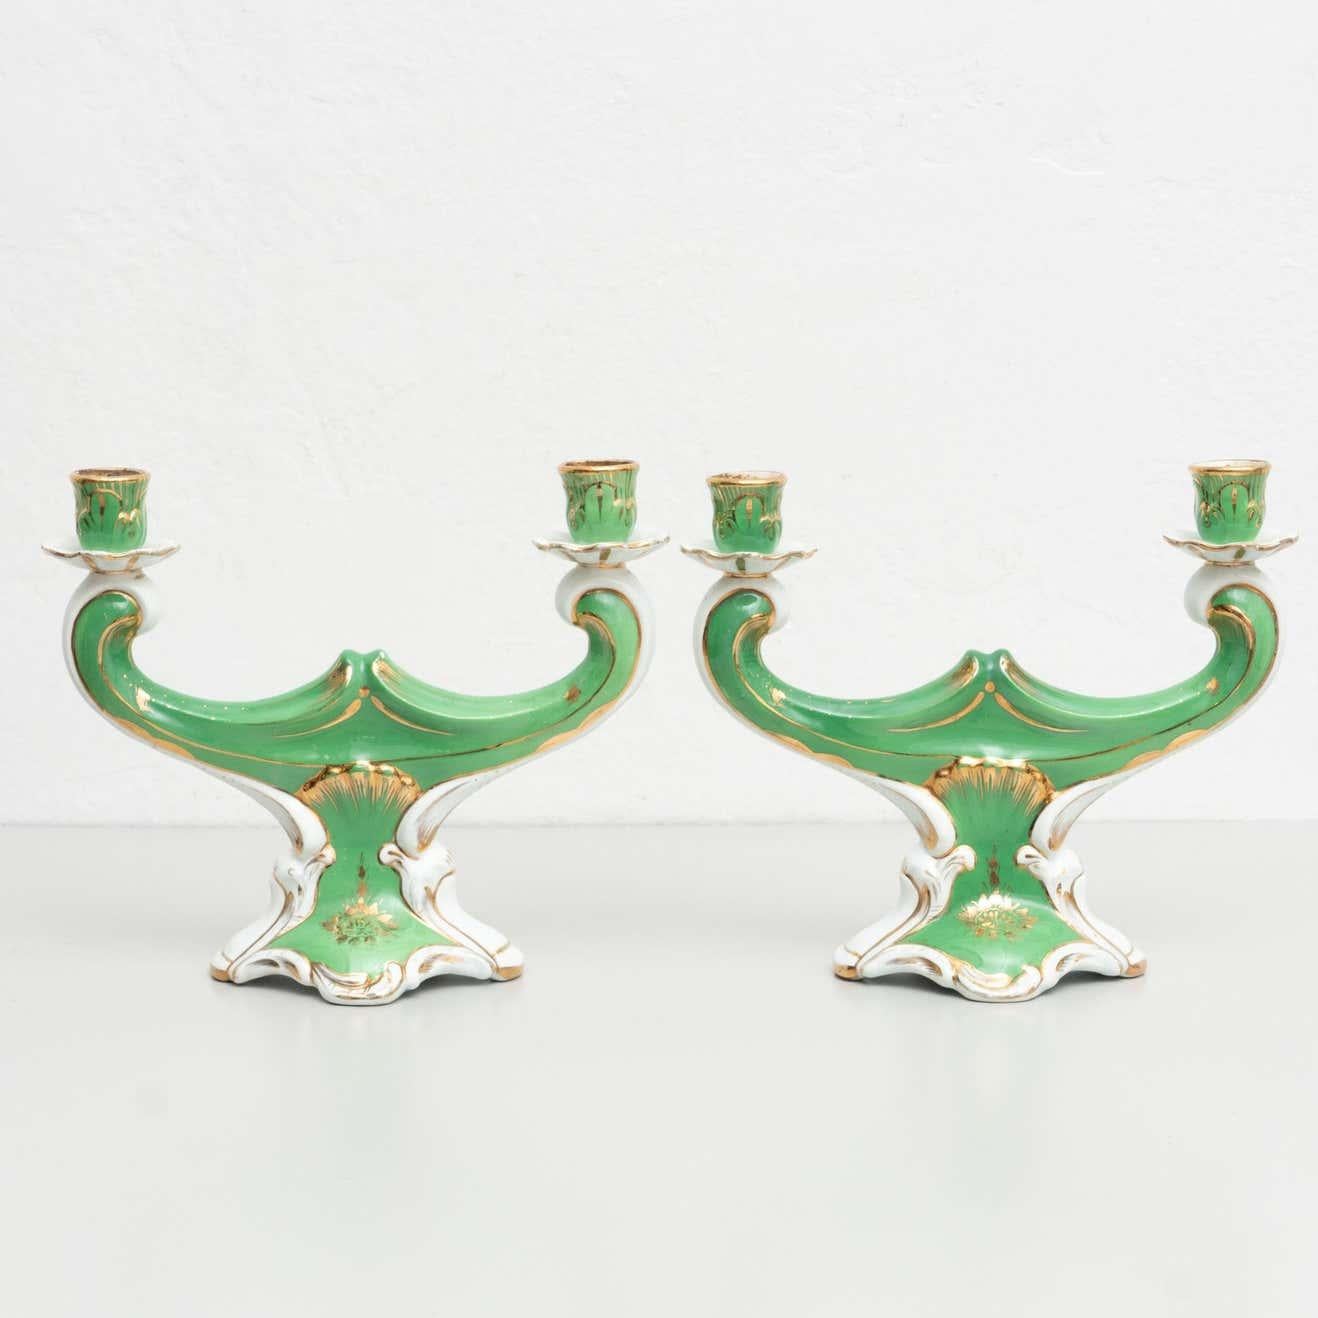 Hand-Painted Set of 2 Hand Painted Ceramic Candle Holders, circa 1930 For Sale